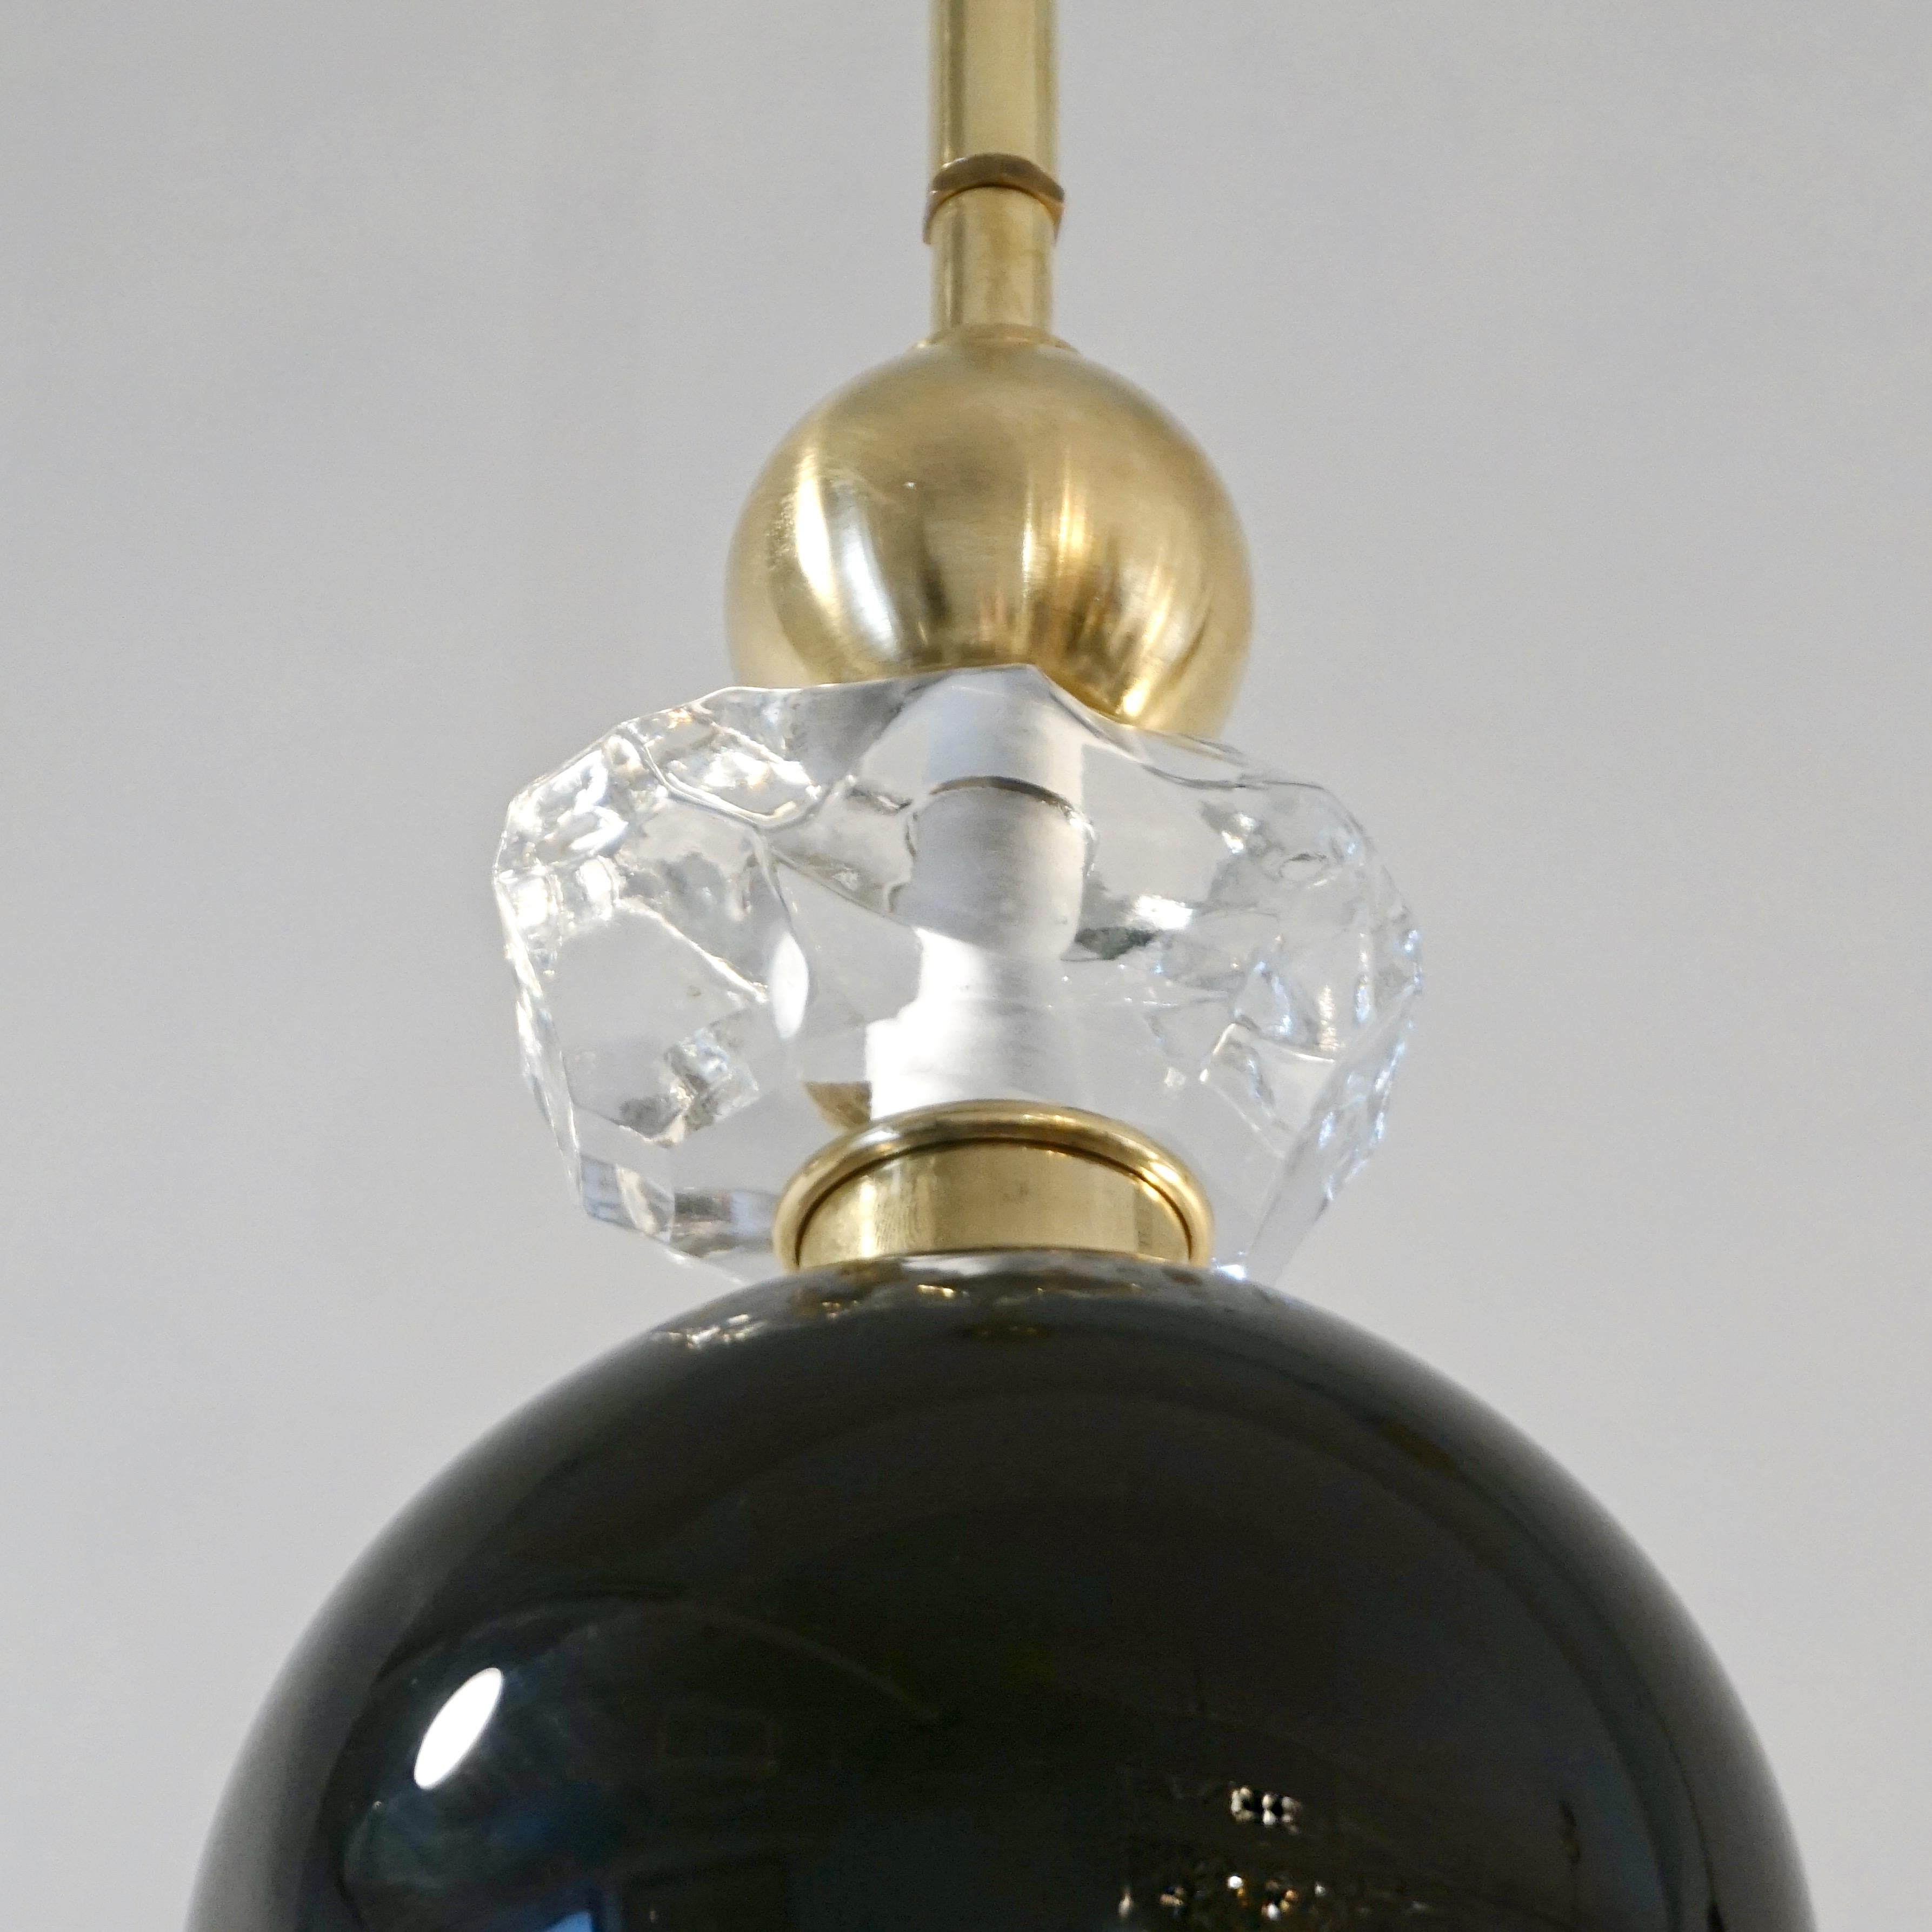 Organic Modern Contemporary Crystal Black and White Smoked Murano Glass Pendant Light For Sale